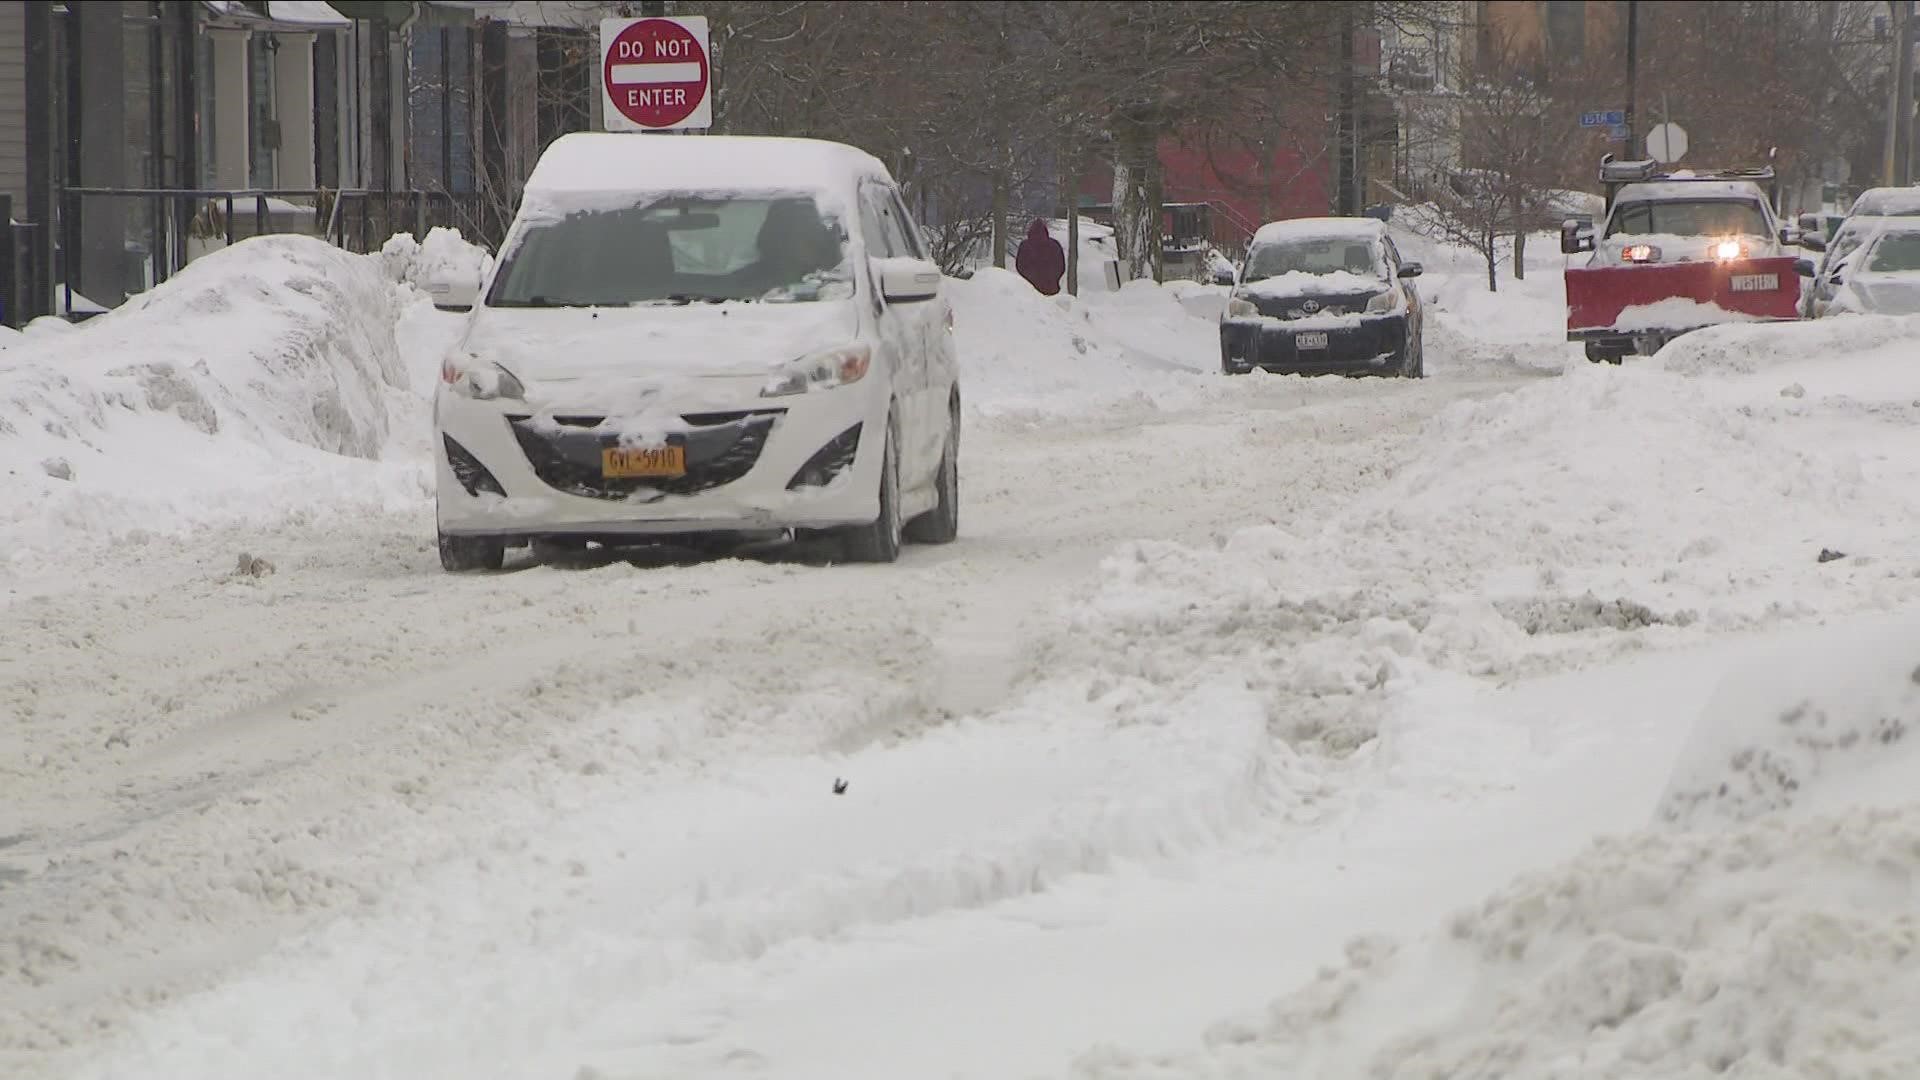 City of Buffalo Officials said Tuesday that work to fix the system is underway.